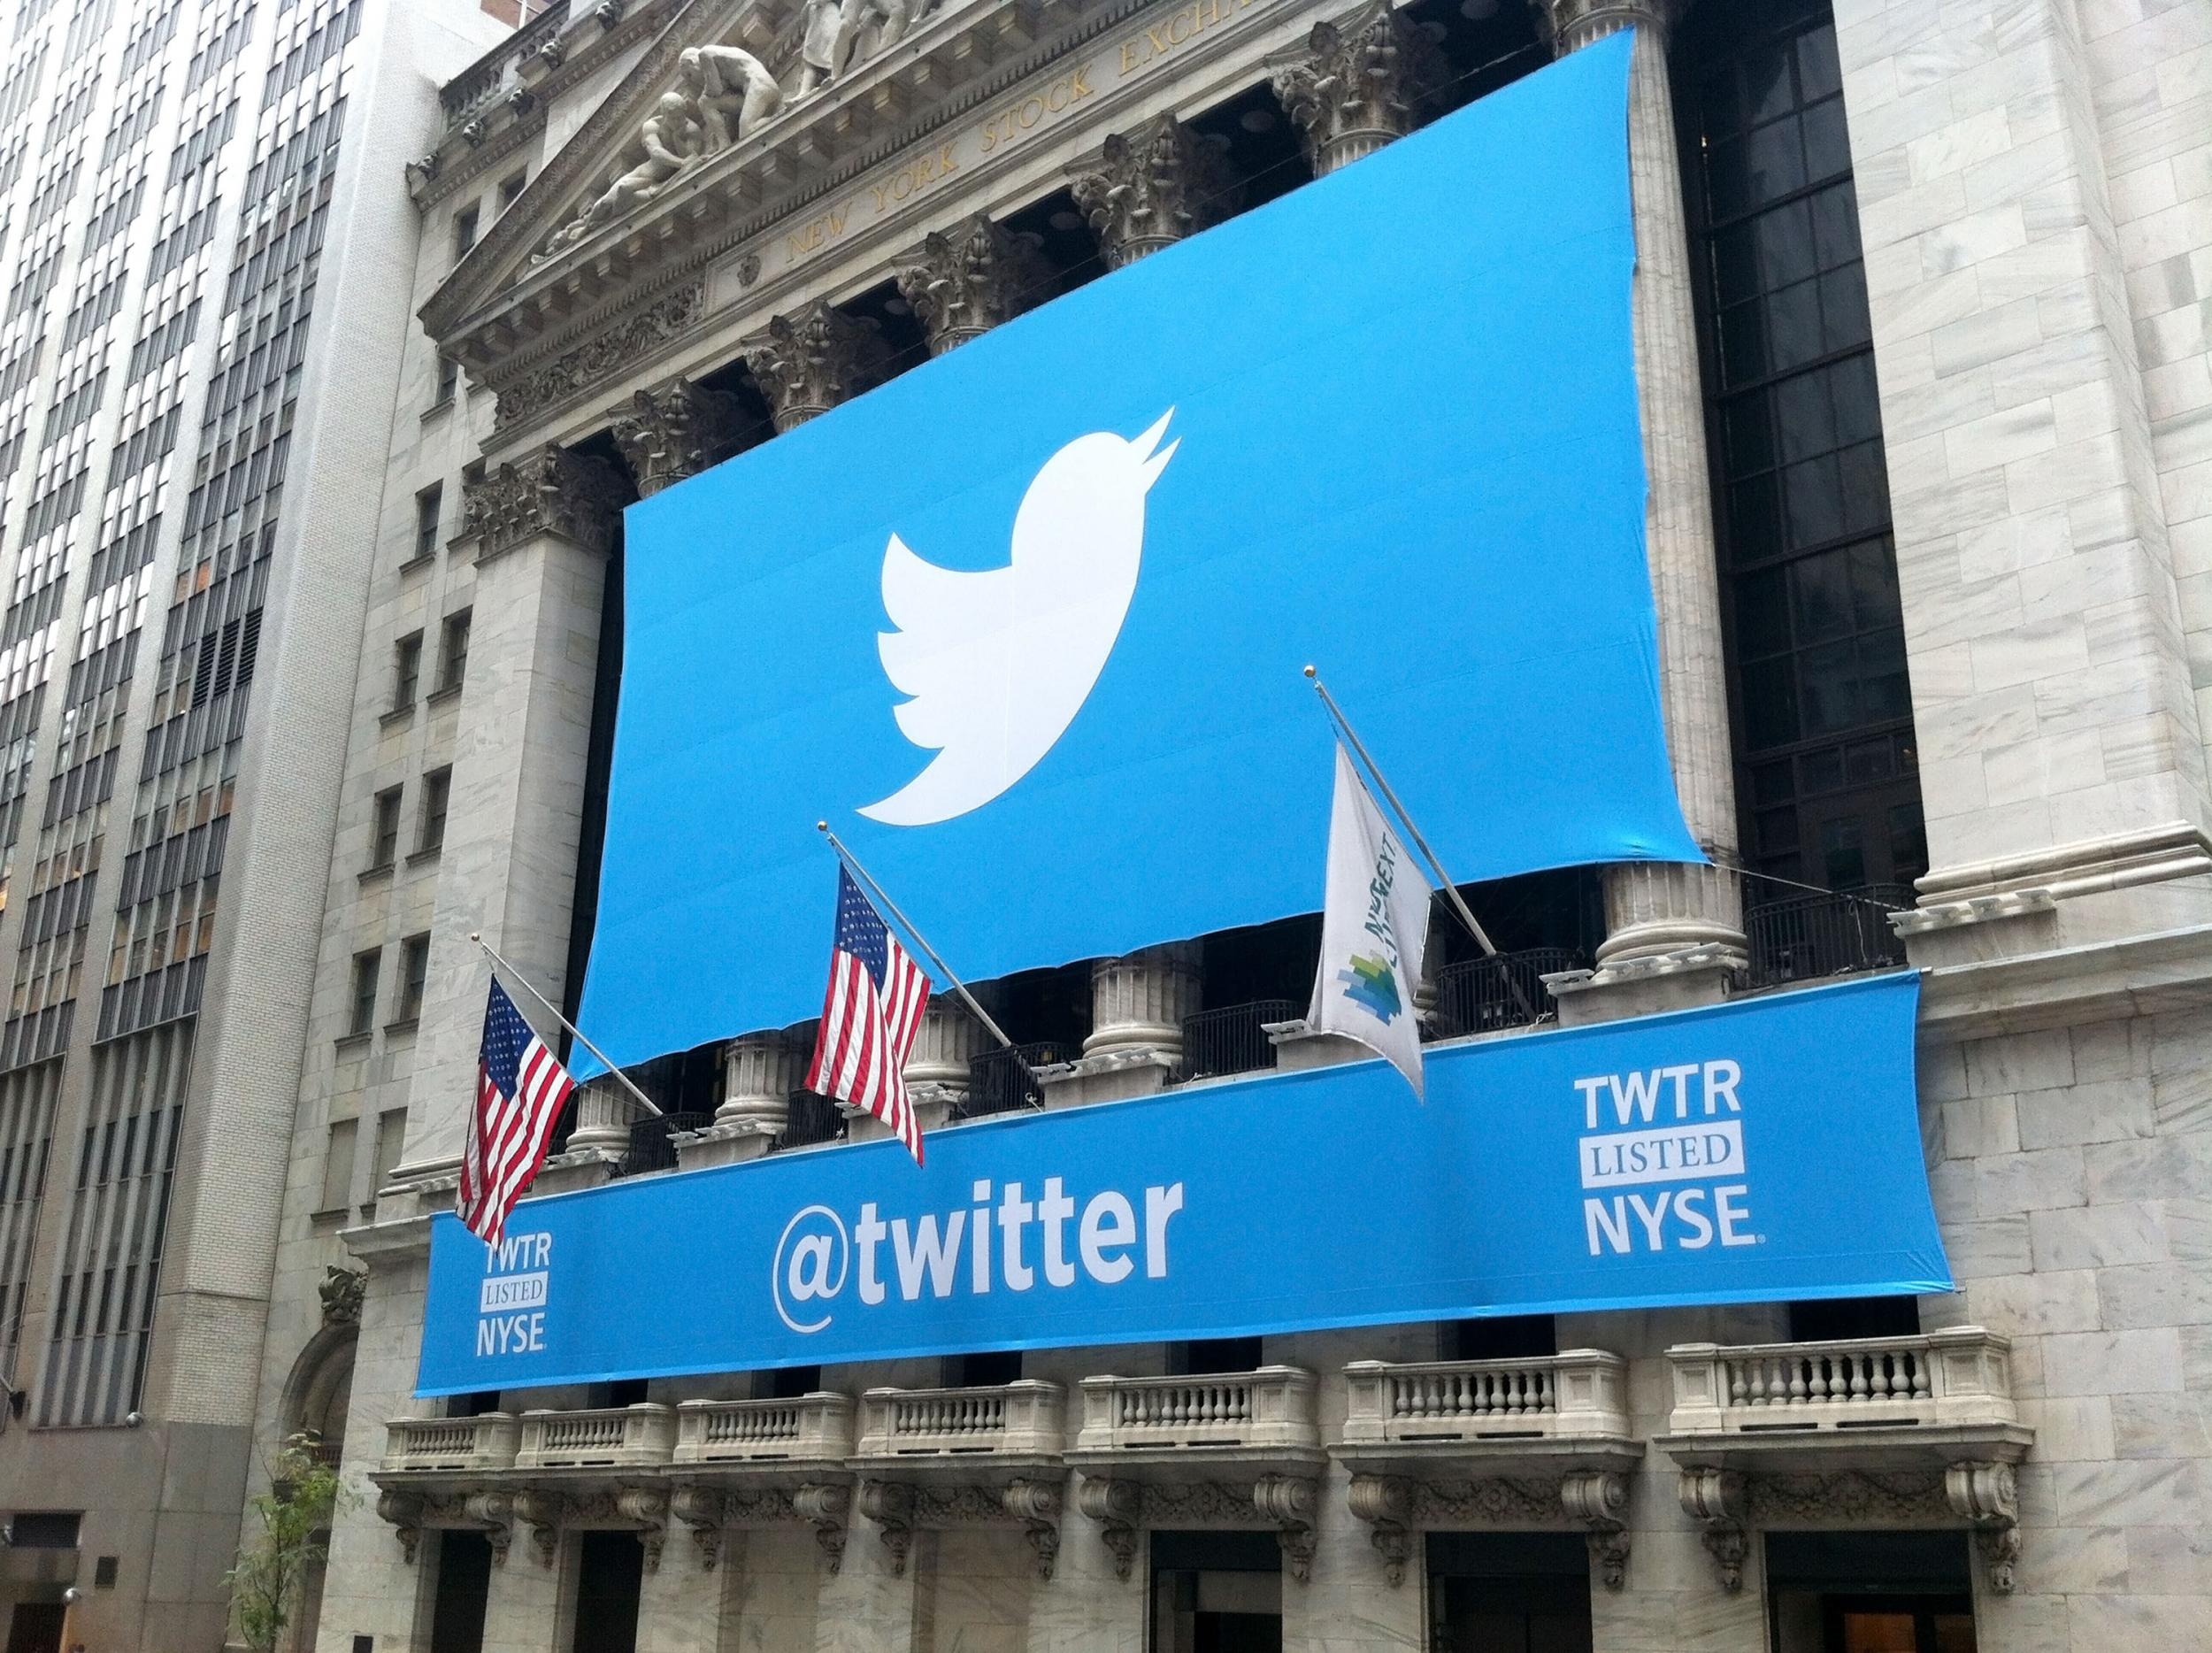 Tweets fond of individual shares have been found to influence the price